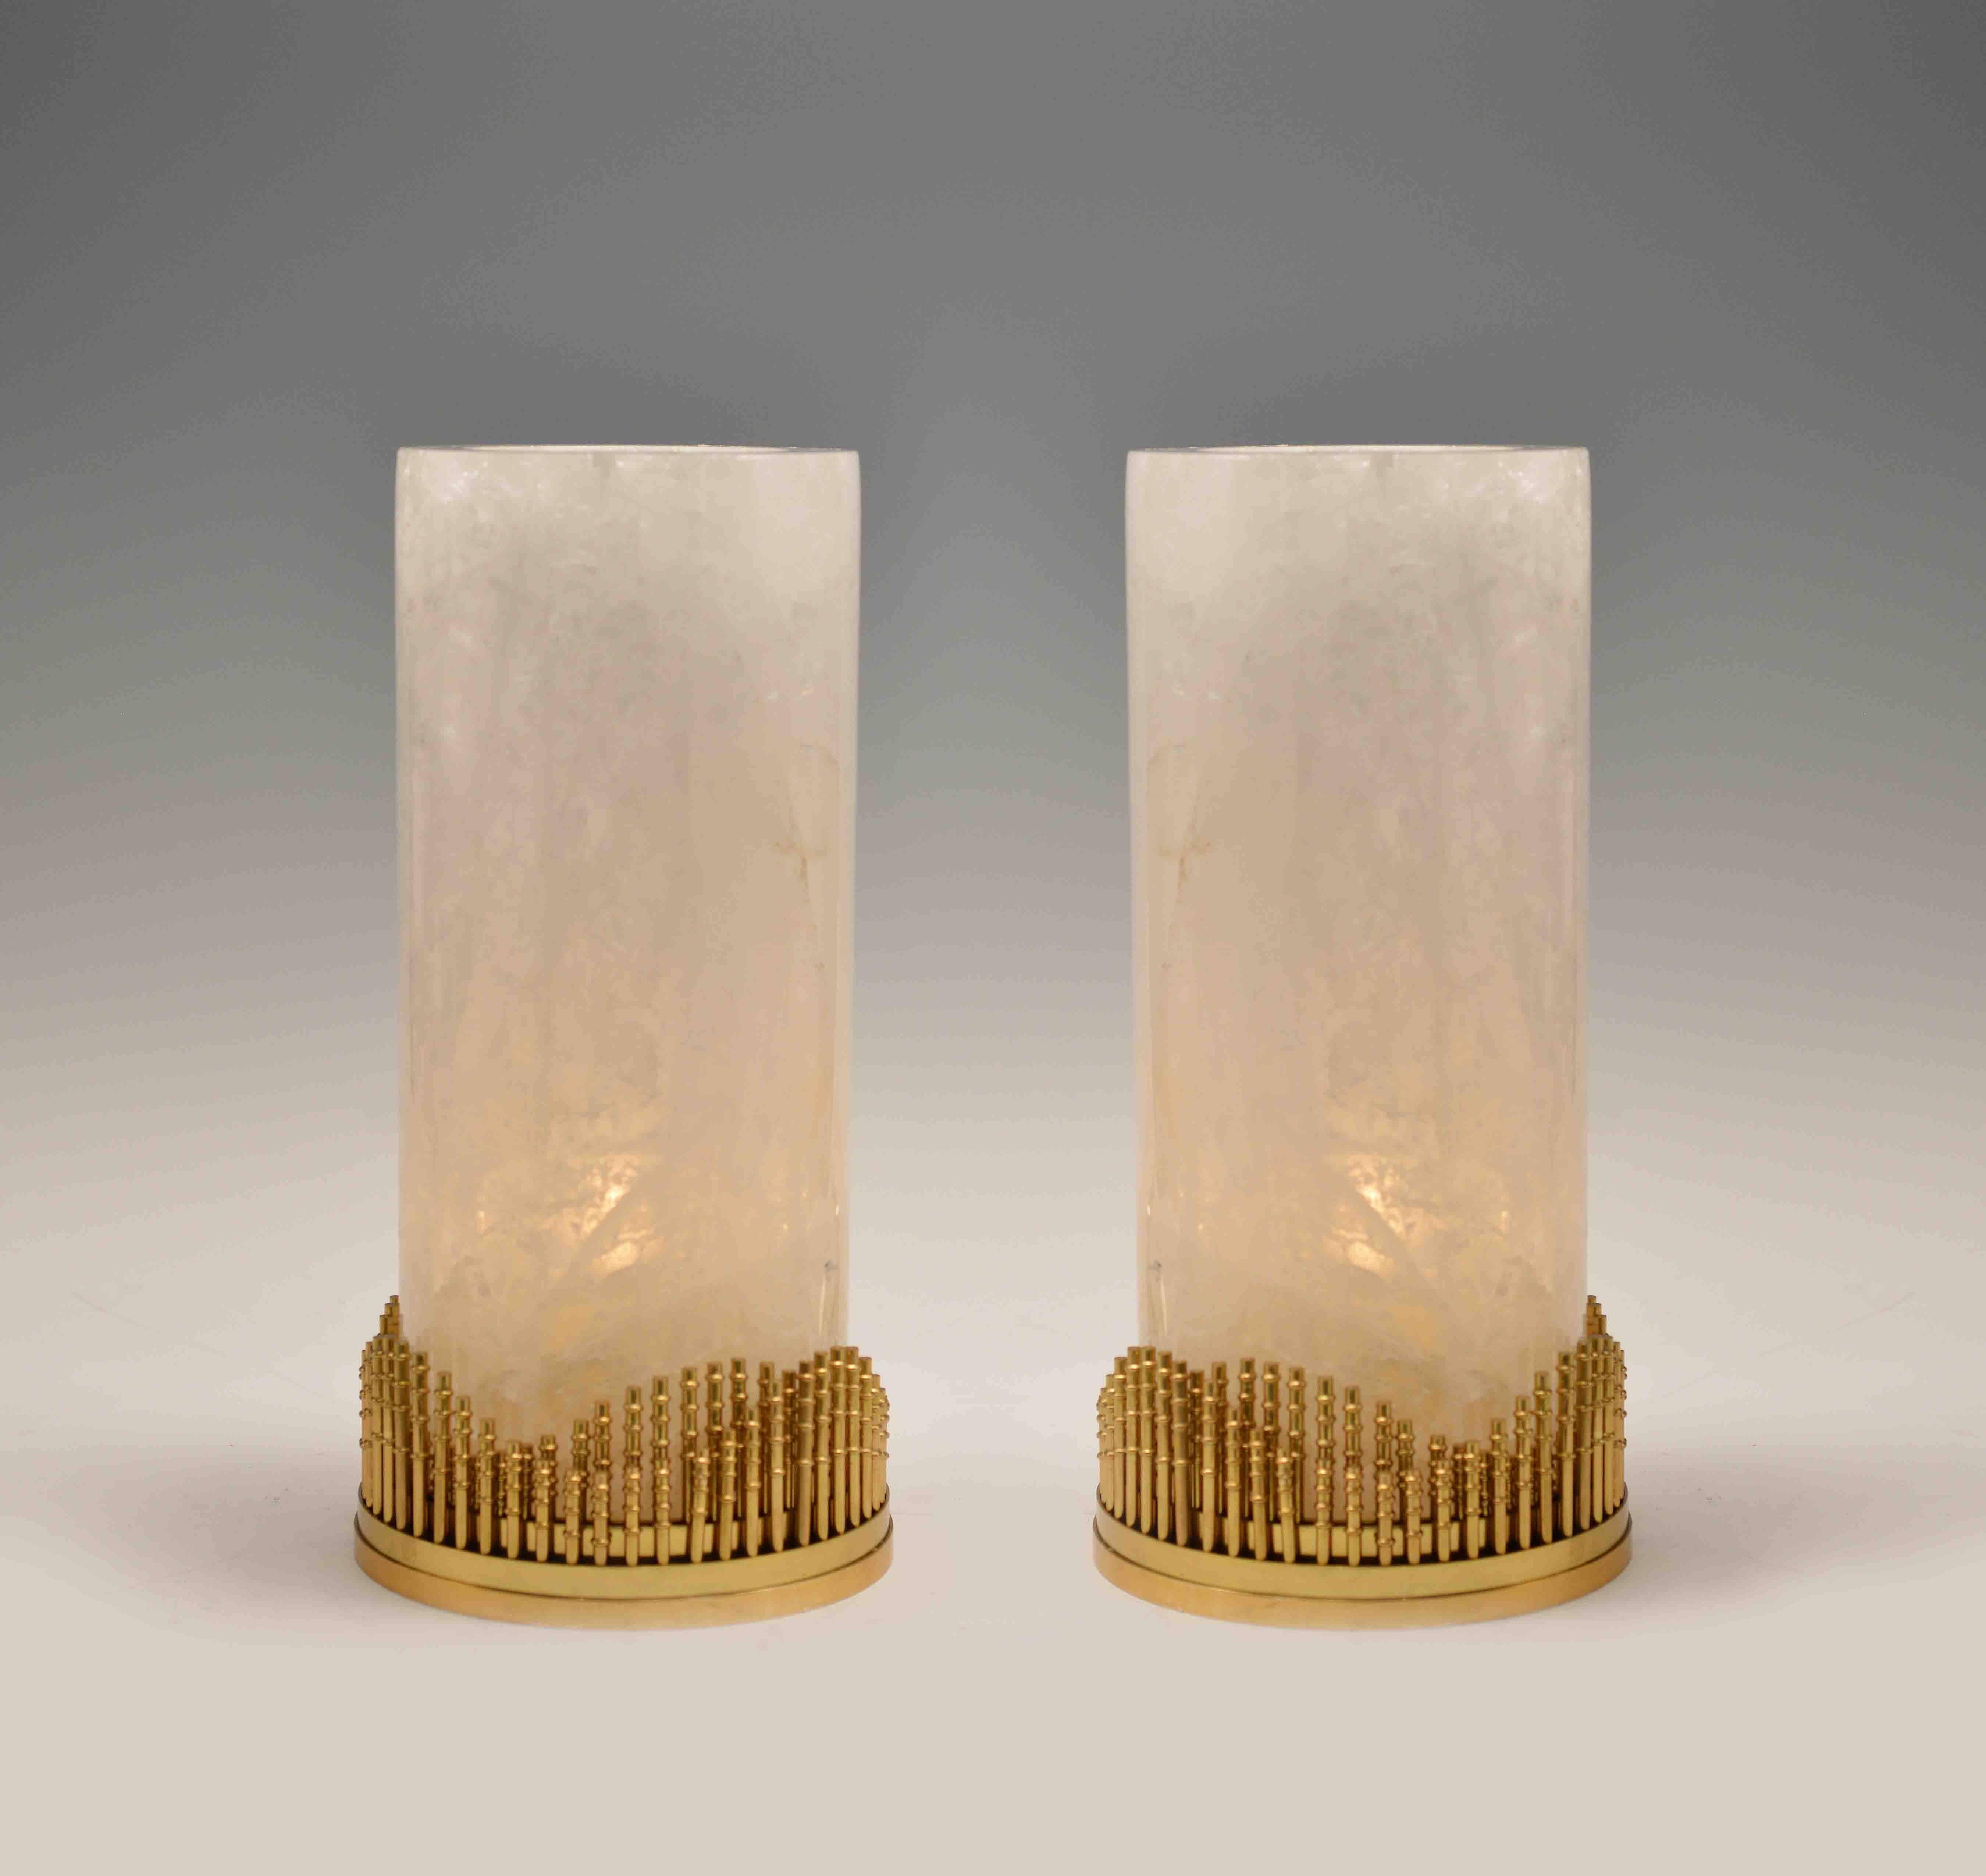 A pair of fine carved rock crystal quartz lanterns with matte brass bases and decorations, created by Phoenix Gallery, NYC.
